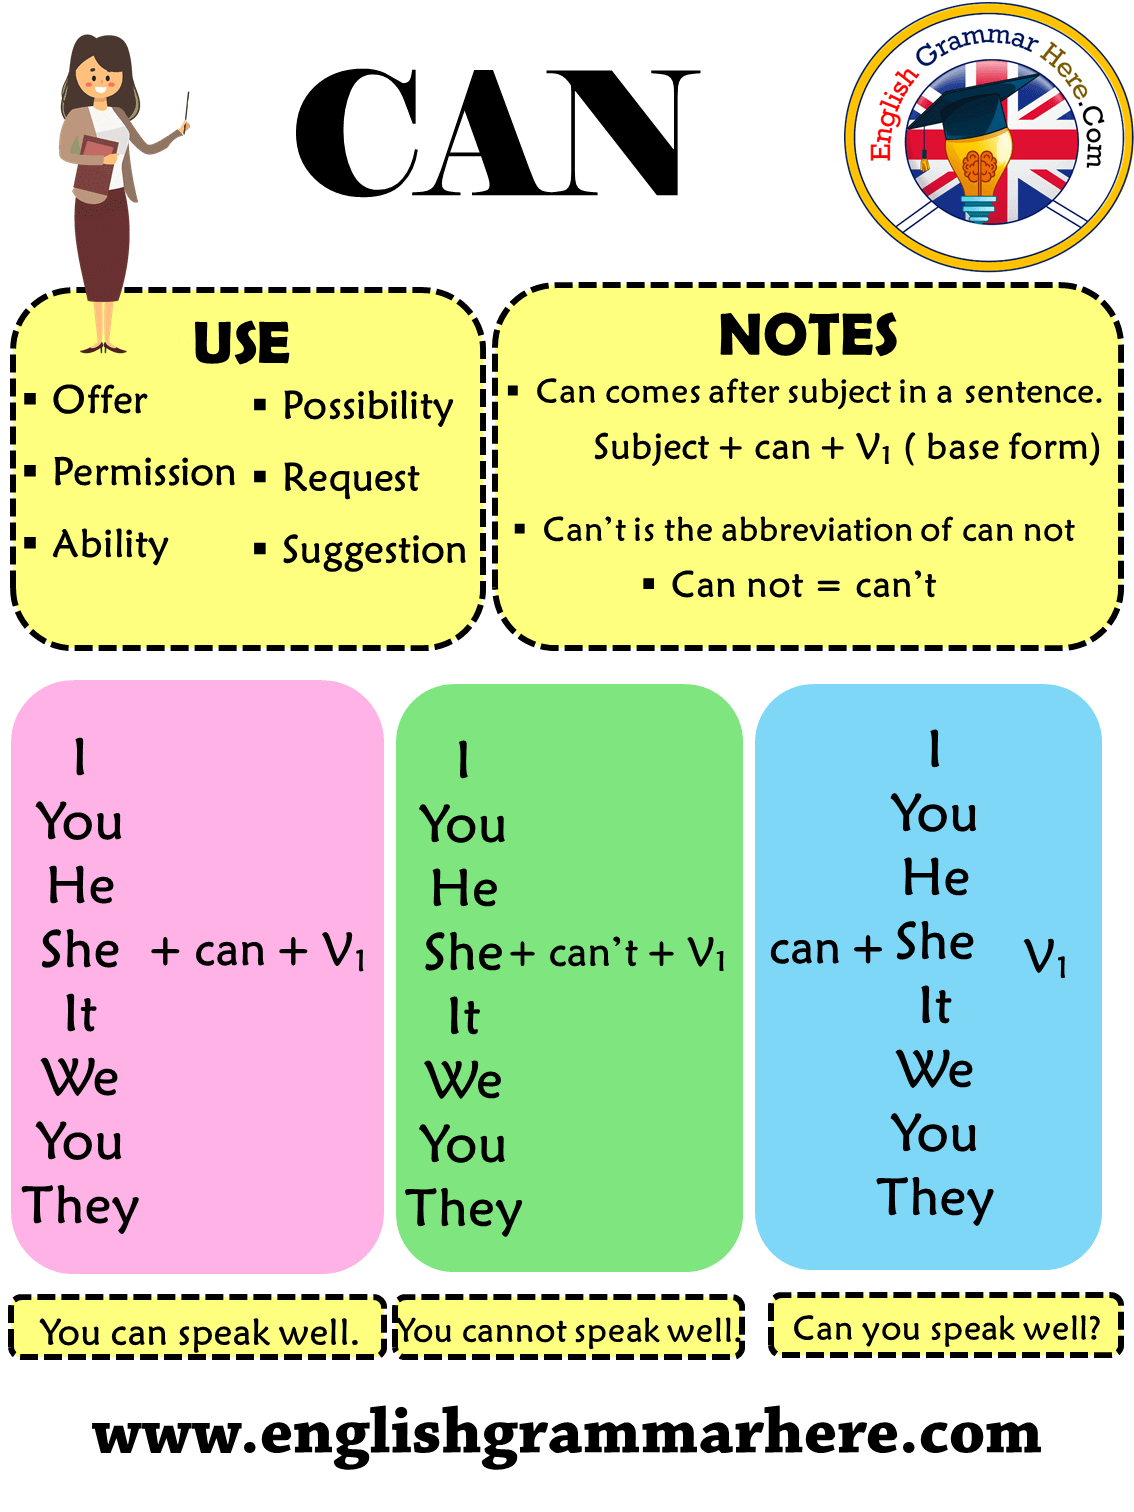 How to use CAN in English